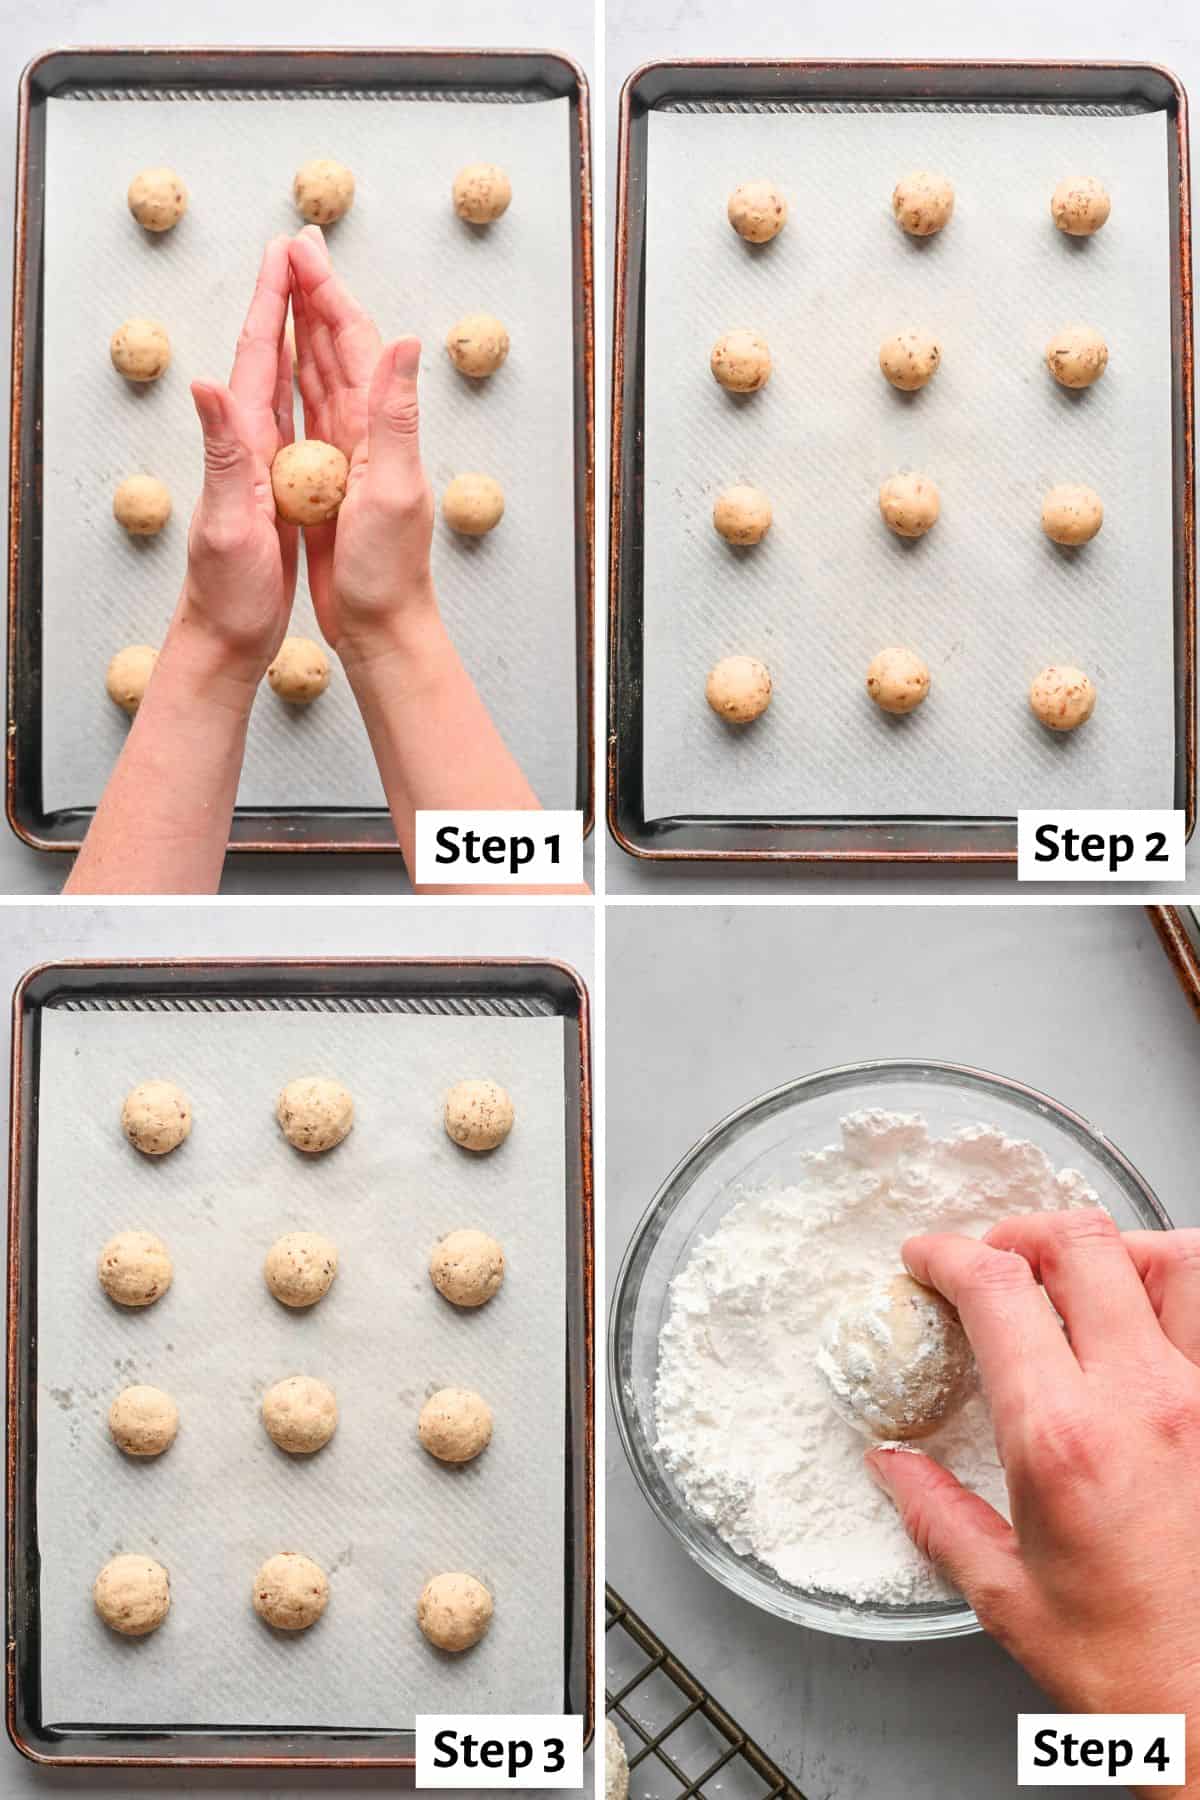 4 image collage making recipe: step 1- hand rolling cookie dough into a ball over a tray of more, step 2- cookies before baking, step 3- cookies after baking, step 4- rolling baked cookie in powdered sugar.